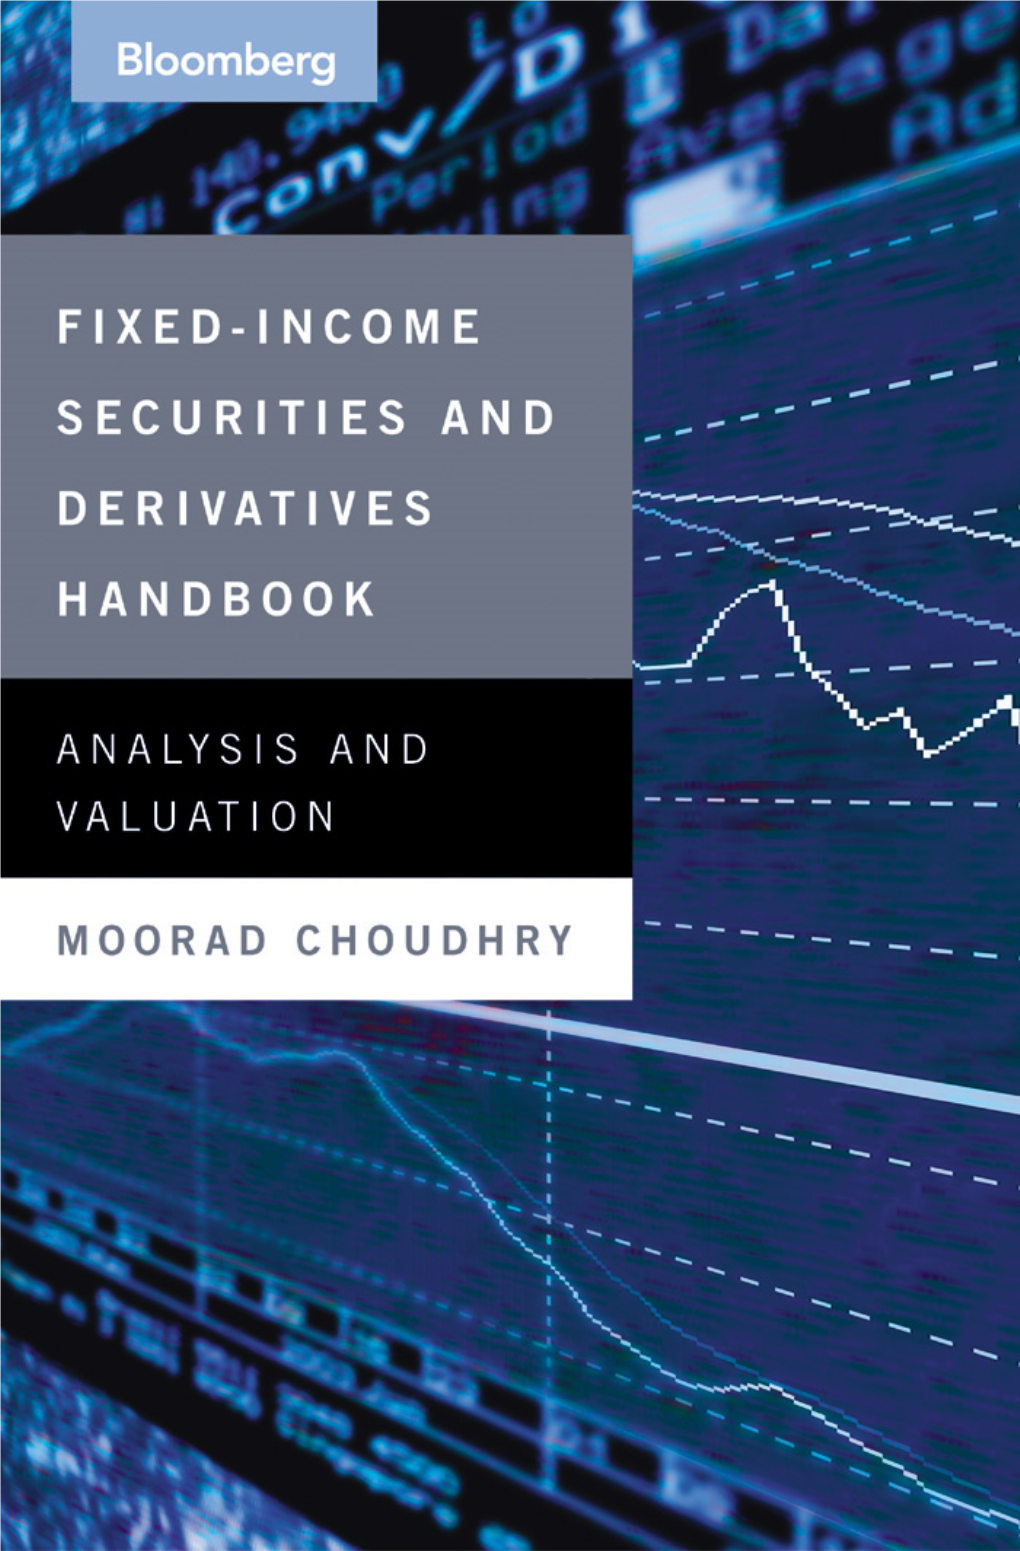 Fixed-Income Securities and Derivatives Handbook : Analysis and Valuation / Moorad Choudhry